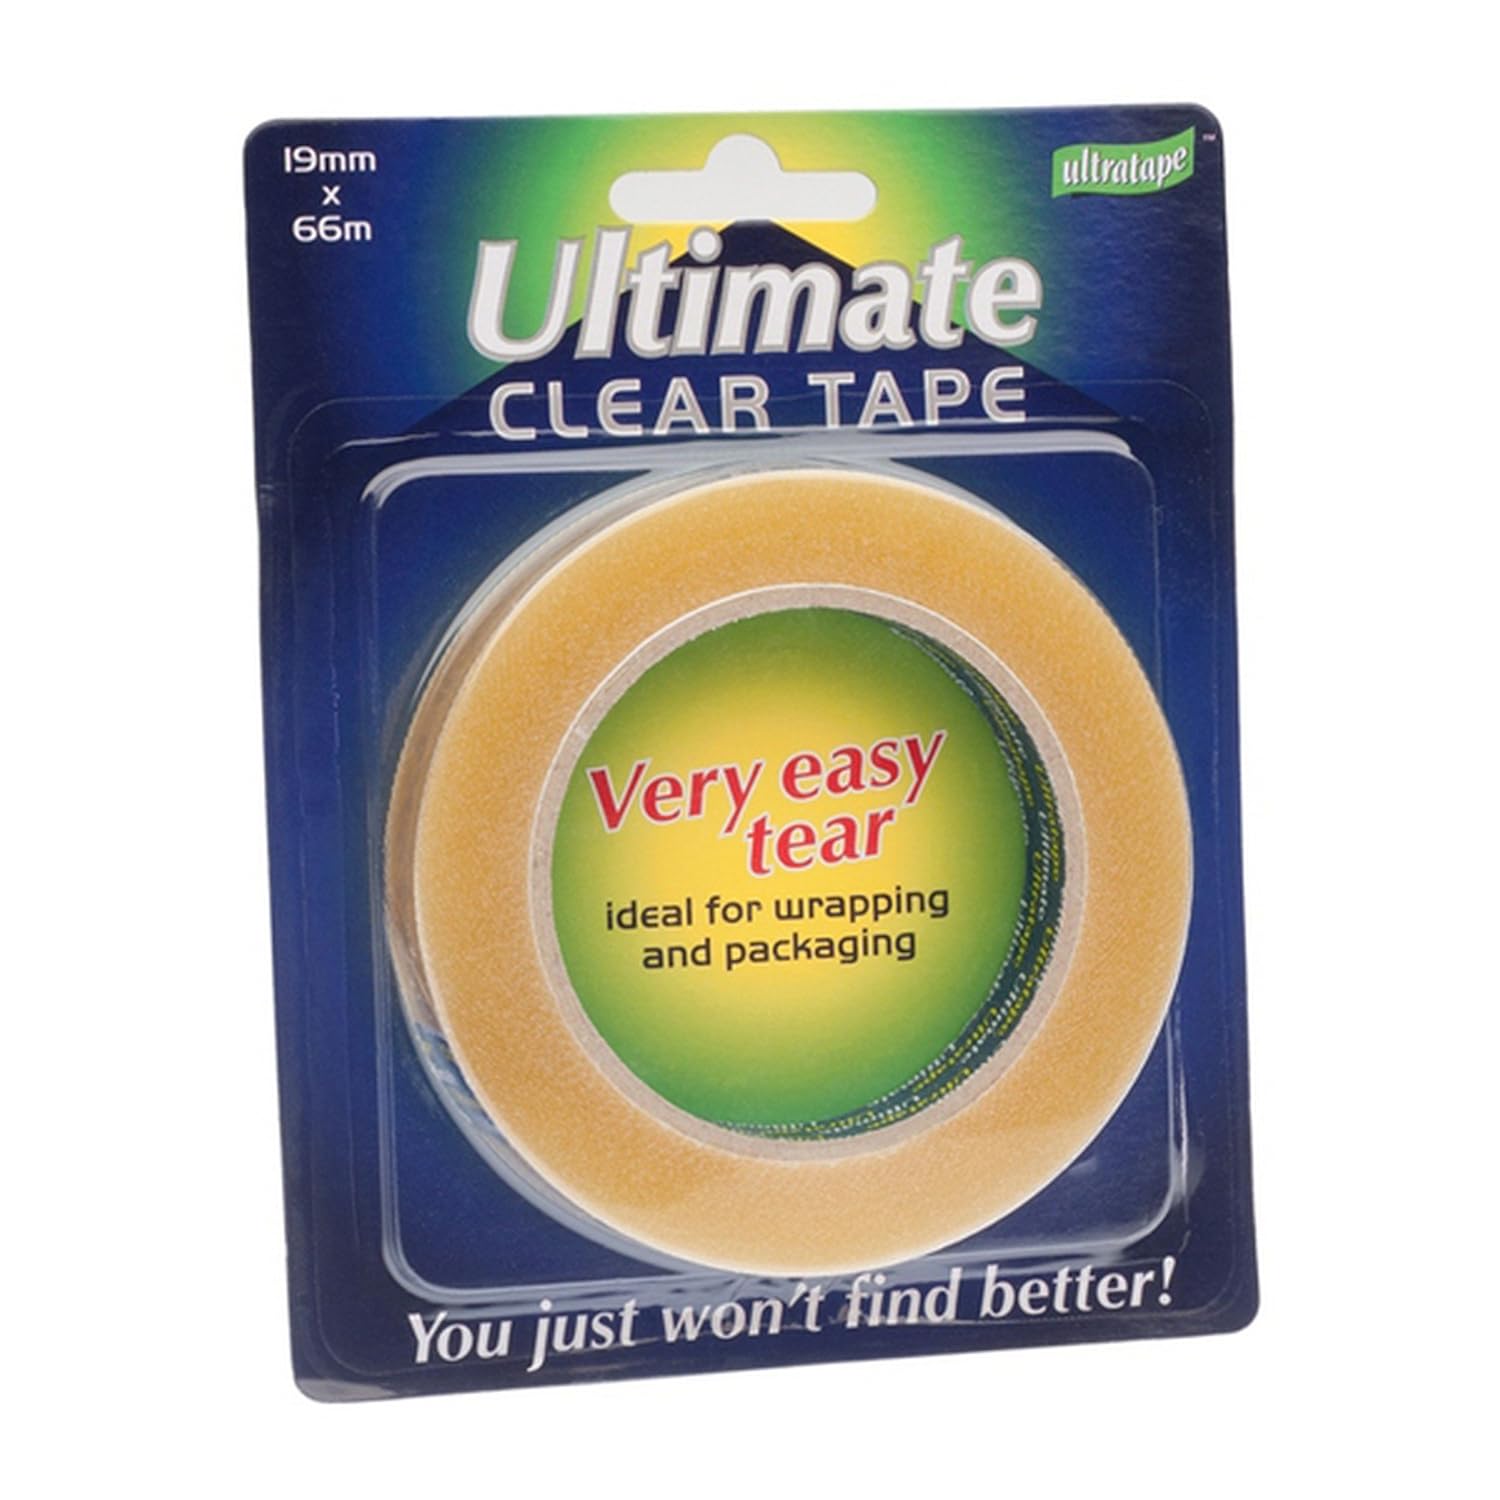 Ultimate Clear Easy Tear Tape, 19mmx66m